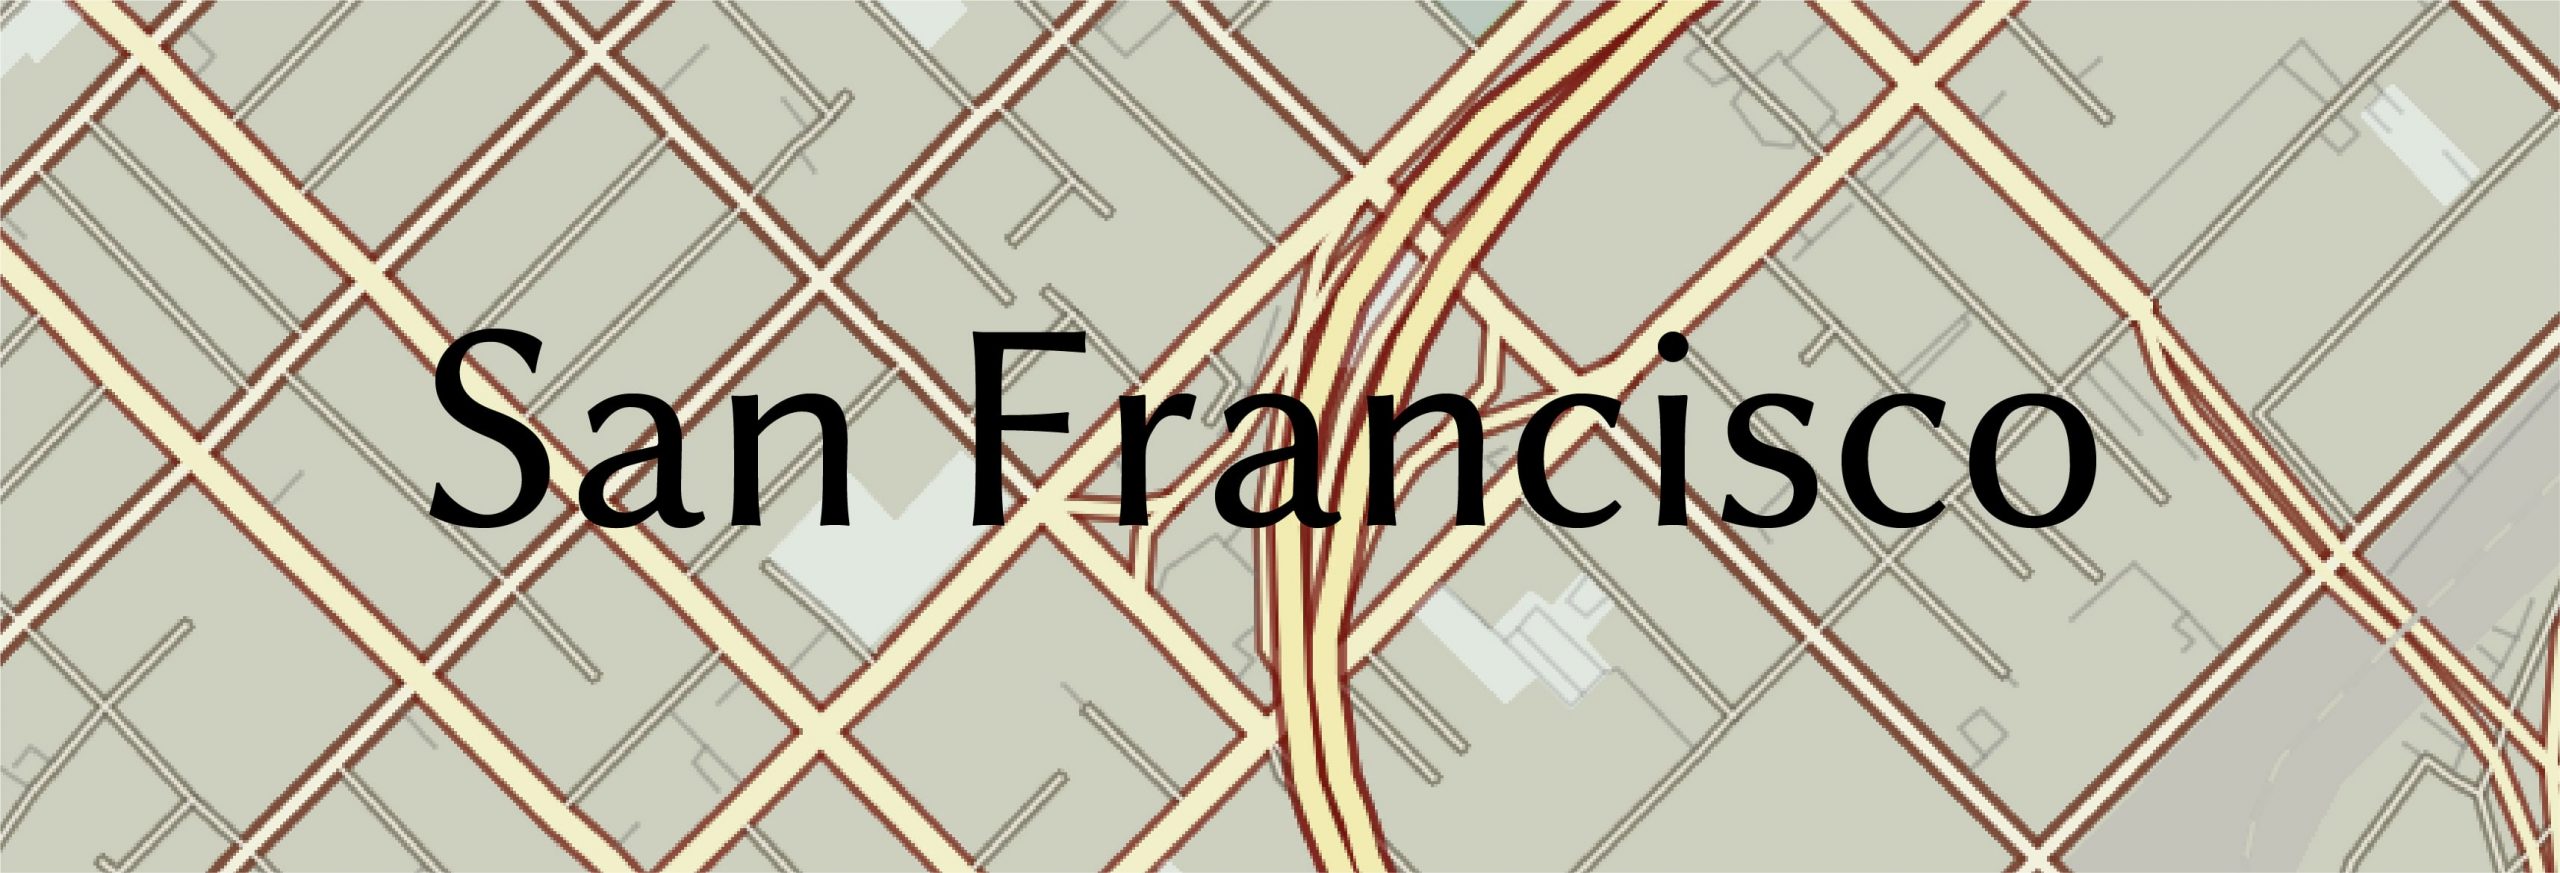 The San Francisco map label over a strong street pattern.